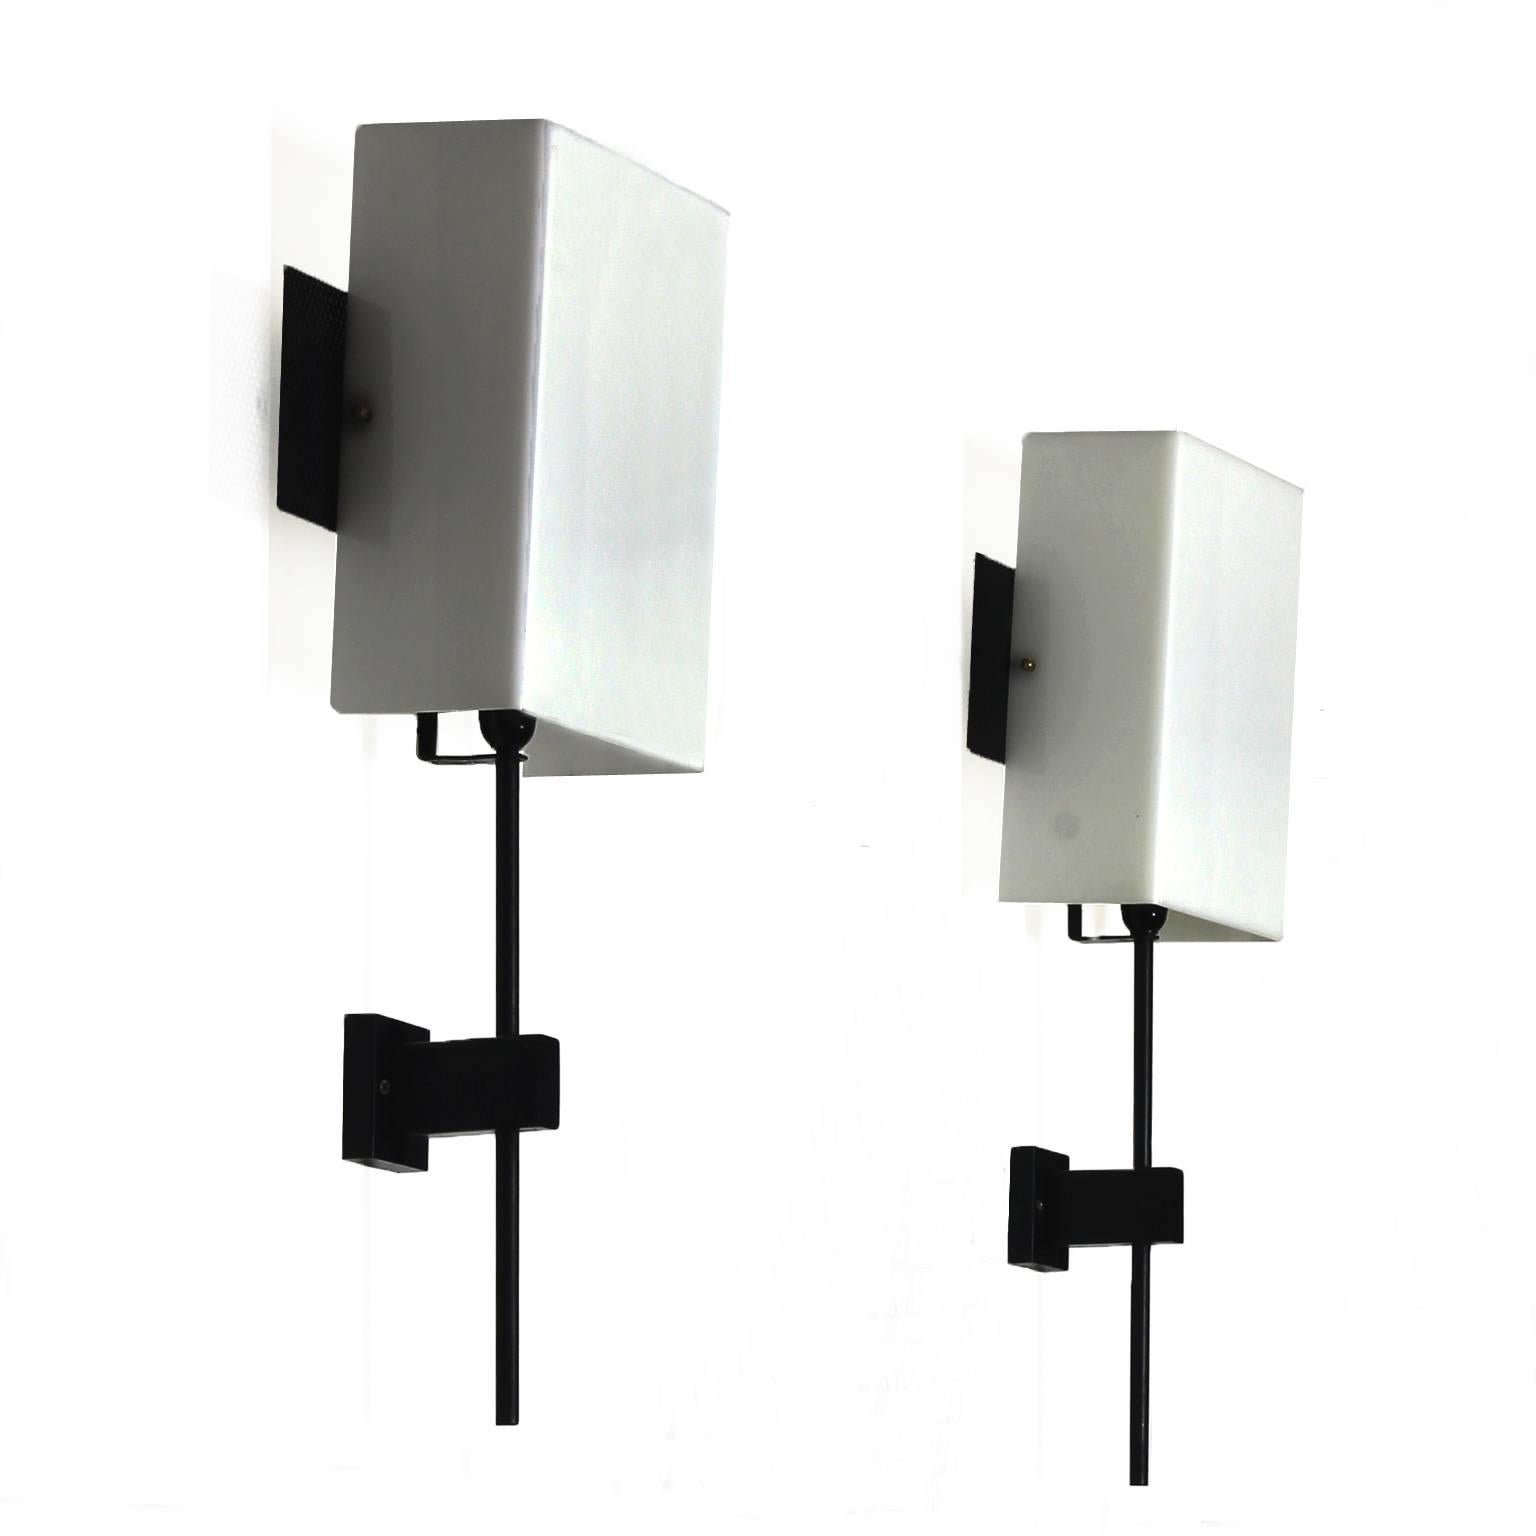 Pair of wall lights, black lacquered sheet metal and steel, plexiglass lampshades, brass screws.

Maker: GMCE.

Italy, circa 1960.